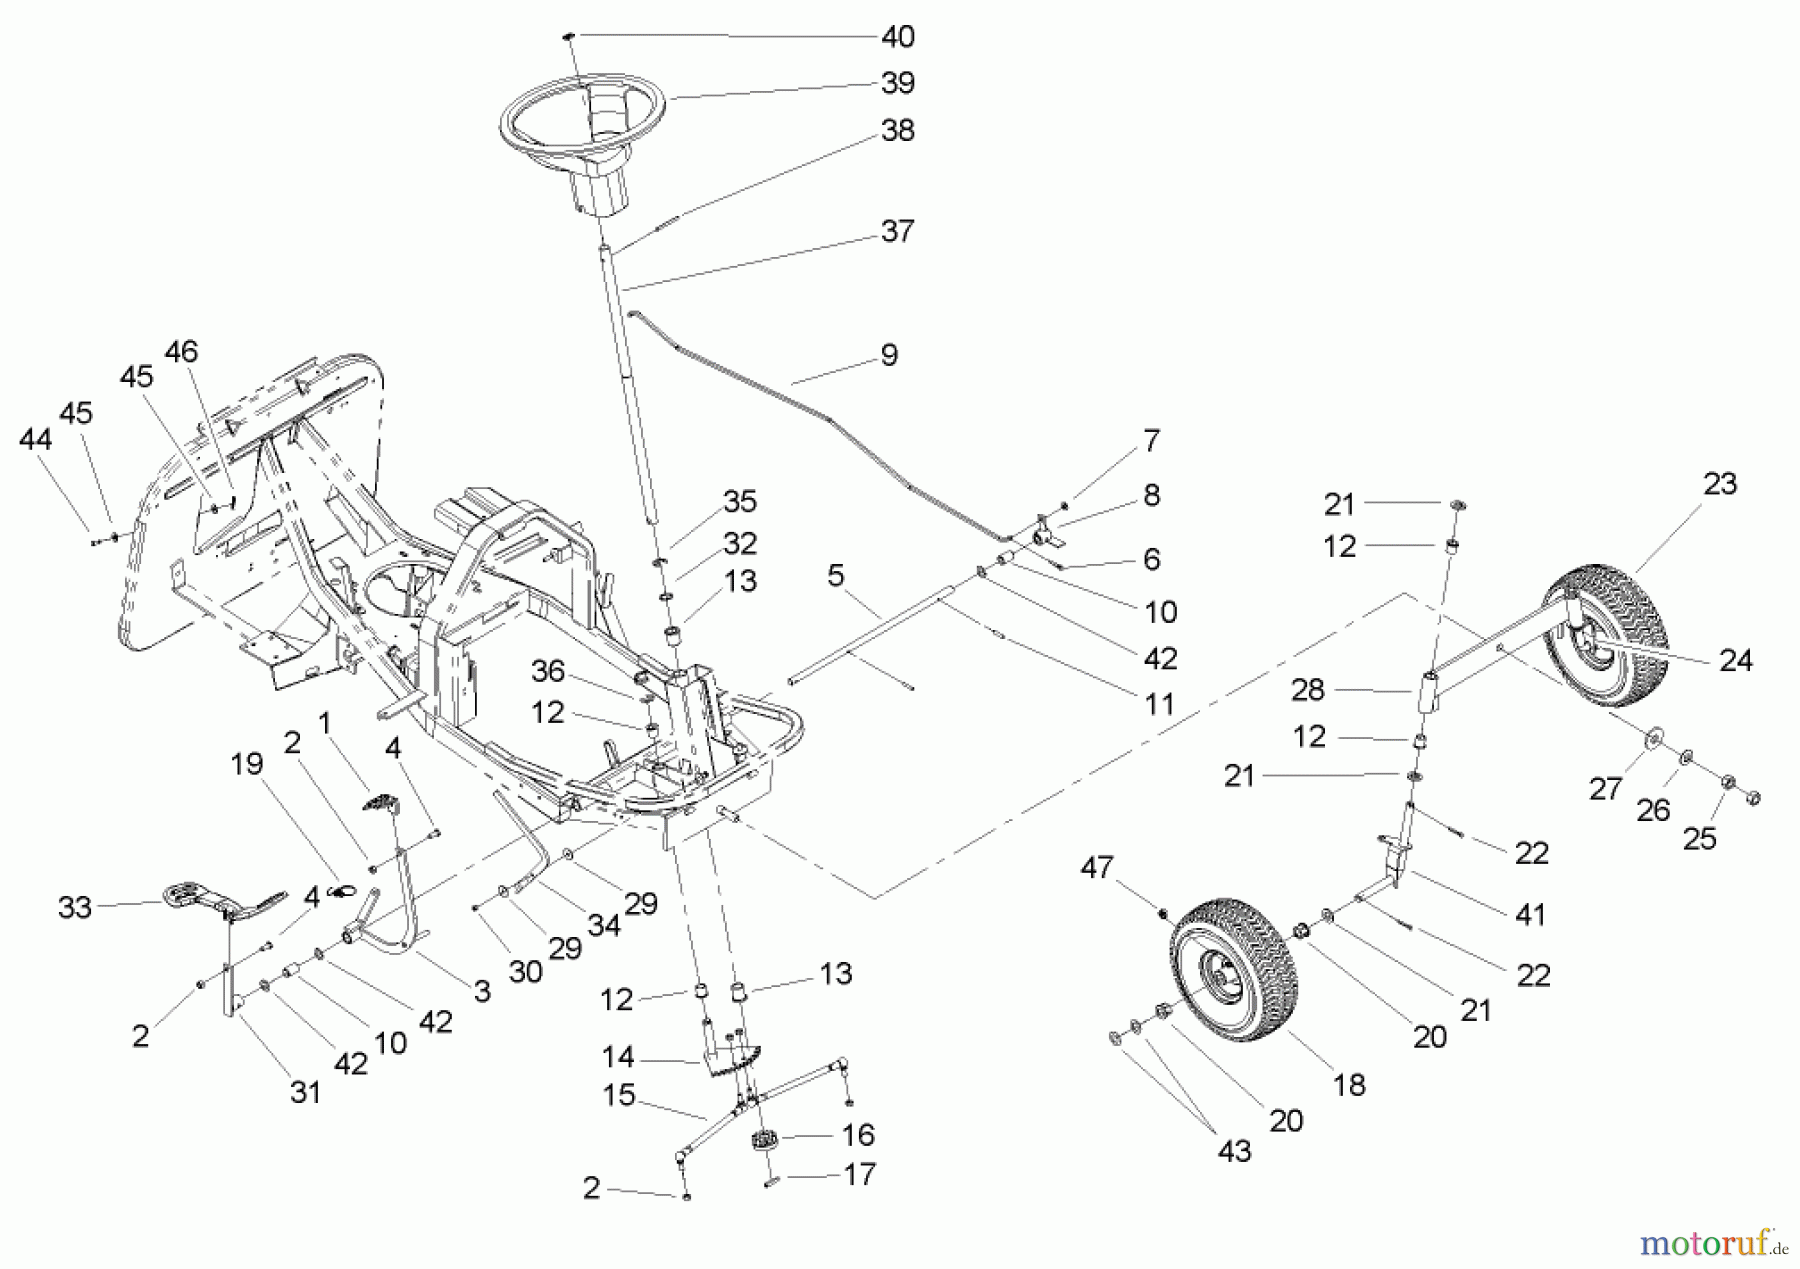  Toro Neu Mowers, Rear-Engine Rider 70186 (H132) - Toro H132 Rear-Engine Riding Mower, 2005 (250000001-250999999) FRONT AXLE AND STEERING ASSEMBLY